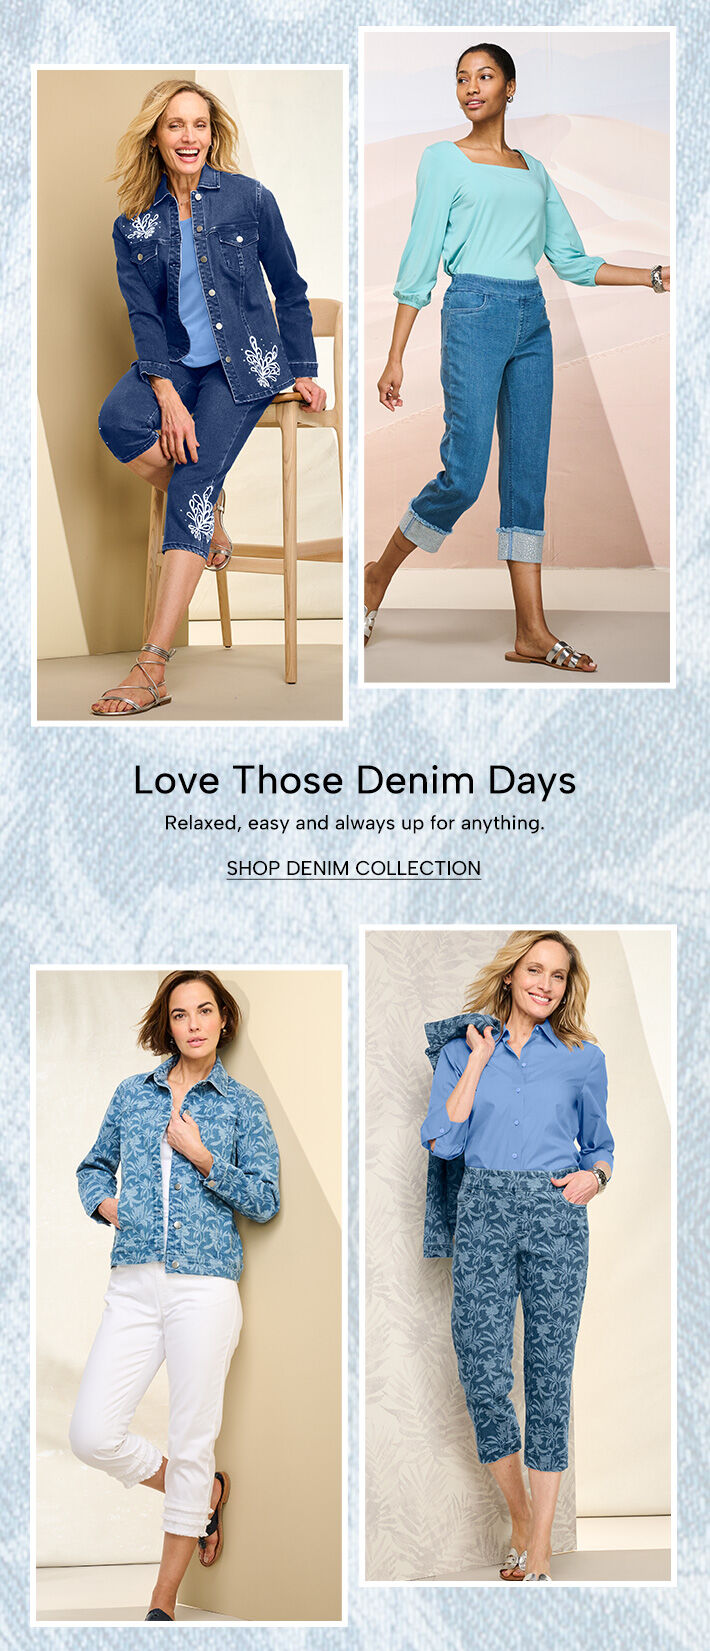 Love those denim days. Relaxed, easy and always up for anything. Shop Denim Collection